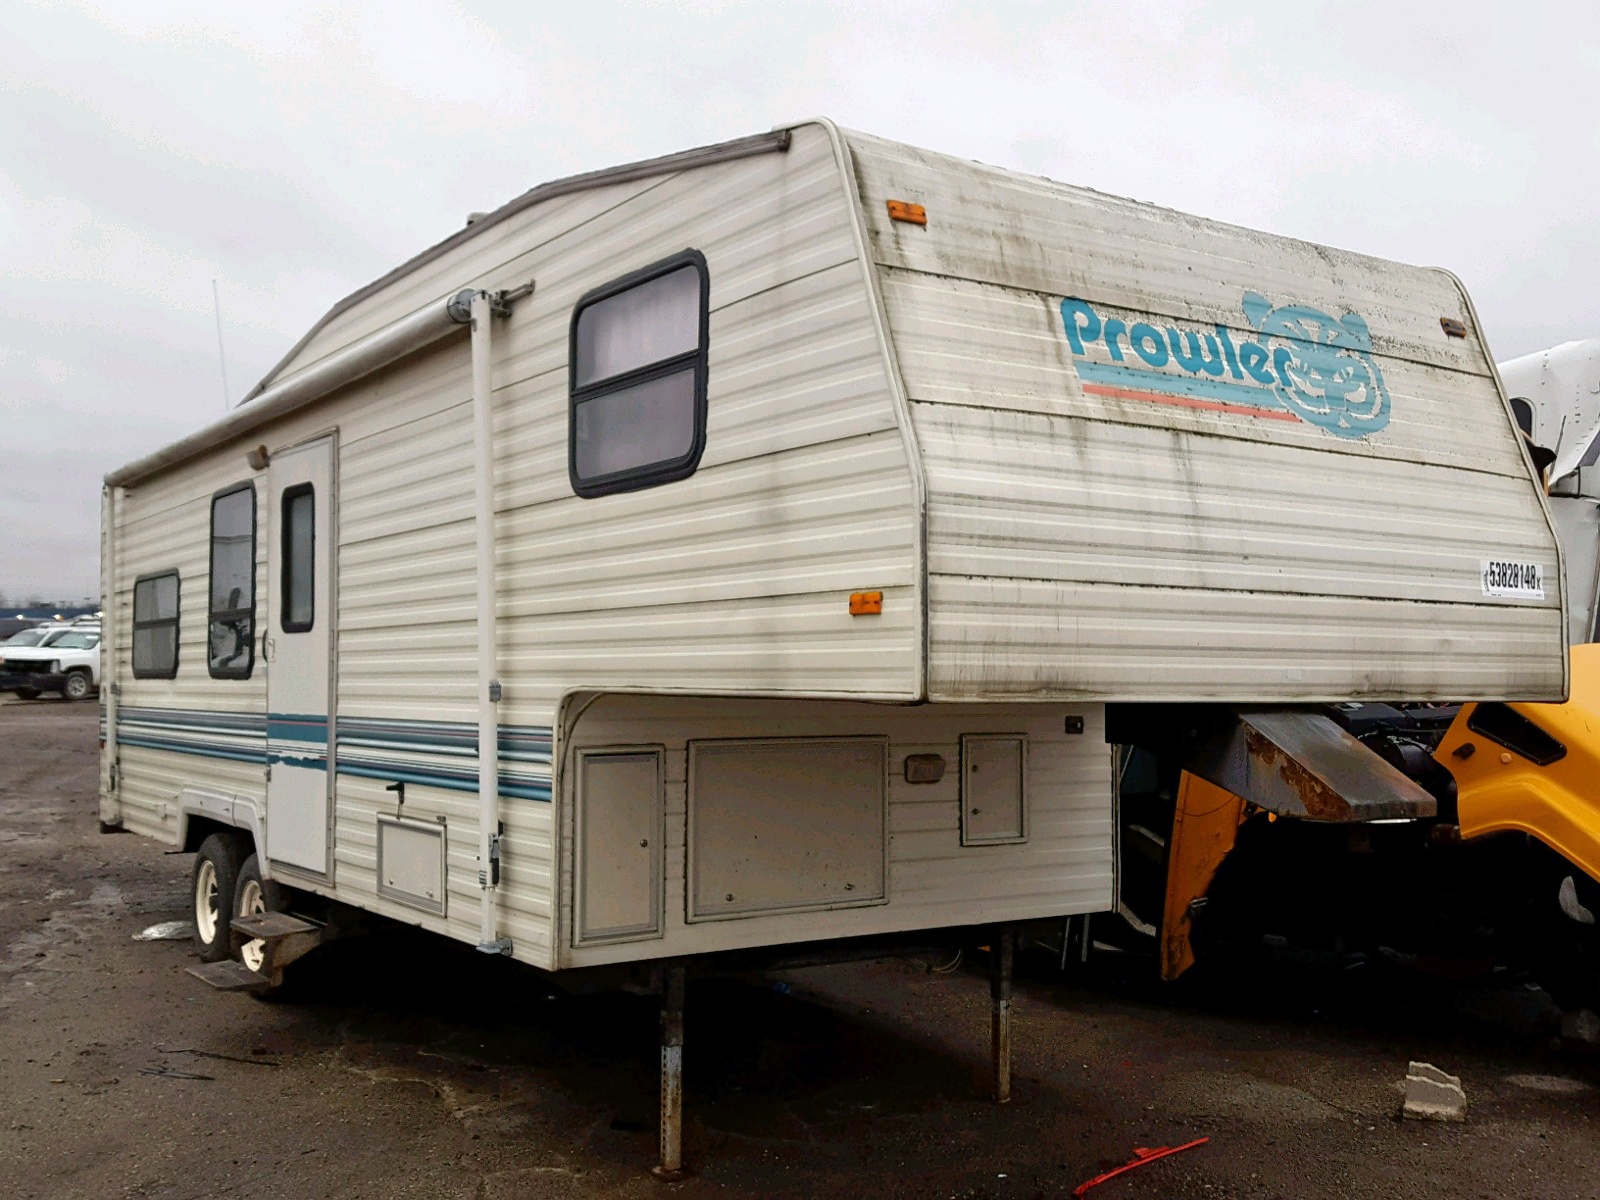 1996 Prowler Travel Trailer for sale at Copart